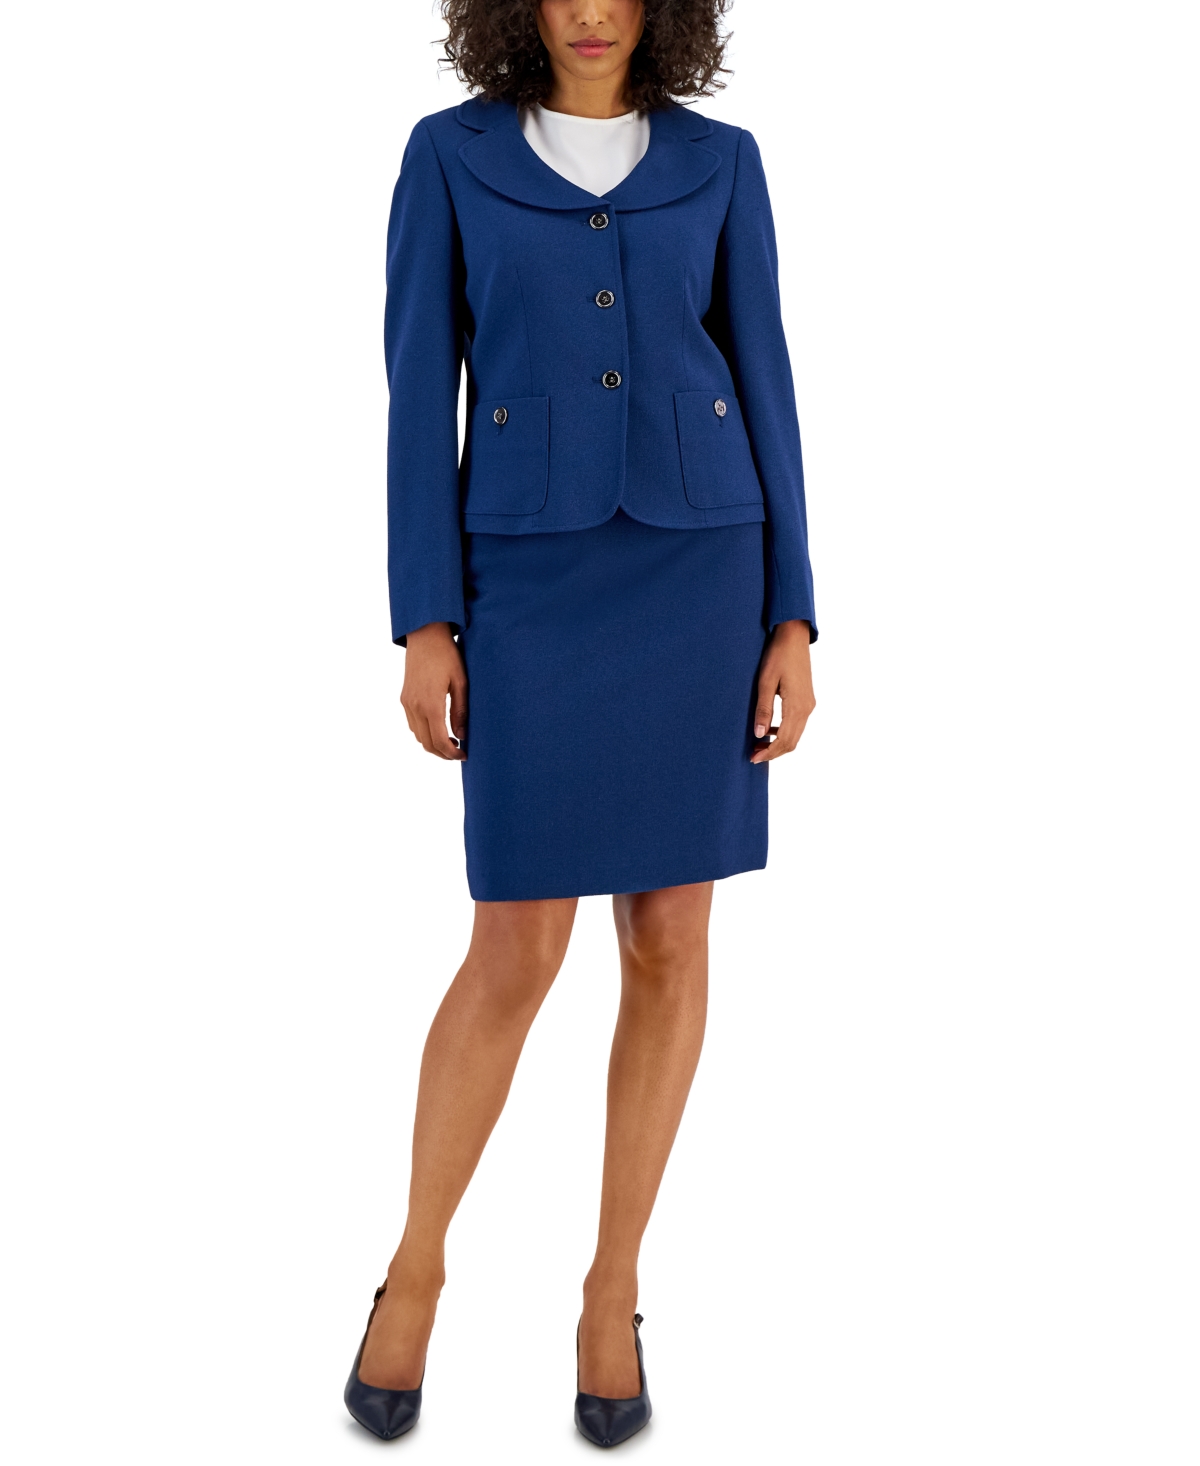 Women's Curved Collar Button-Front Jacket & Pencil Skirt Suit - Cherry Sprig